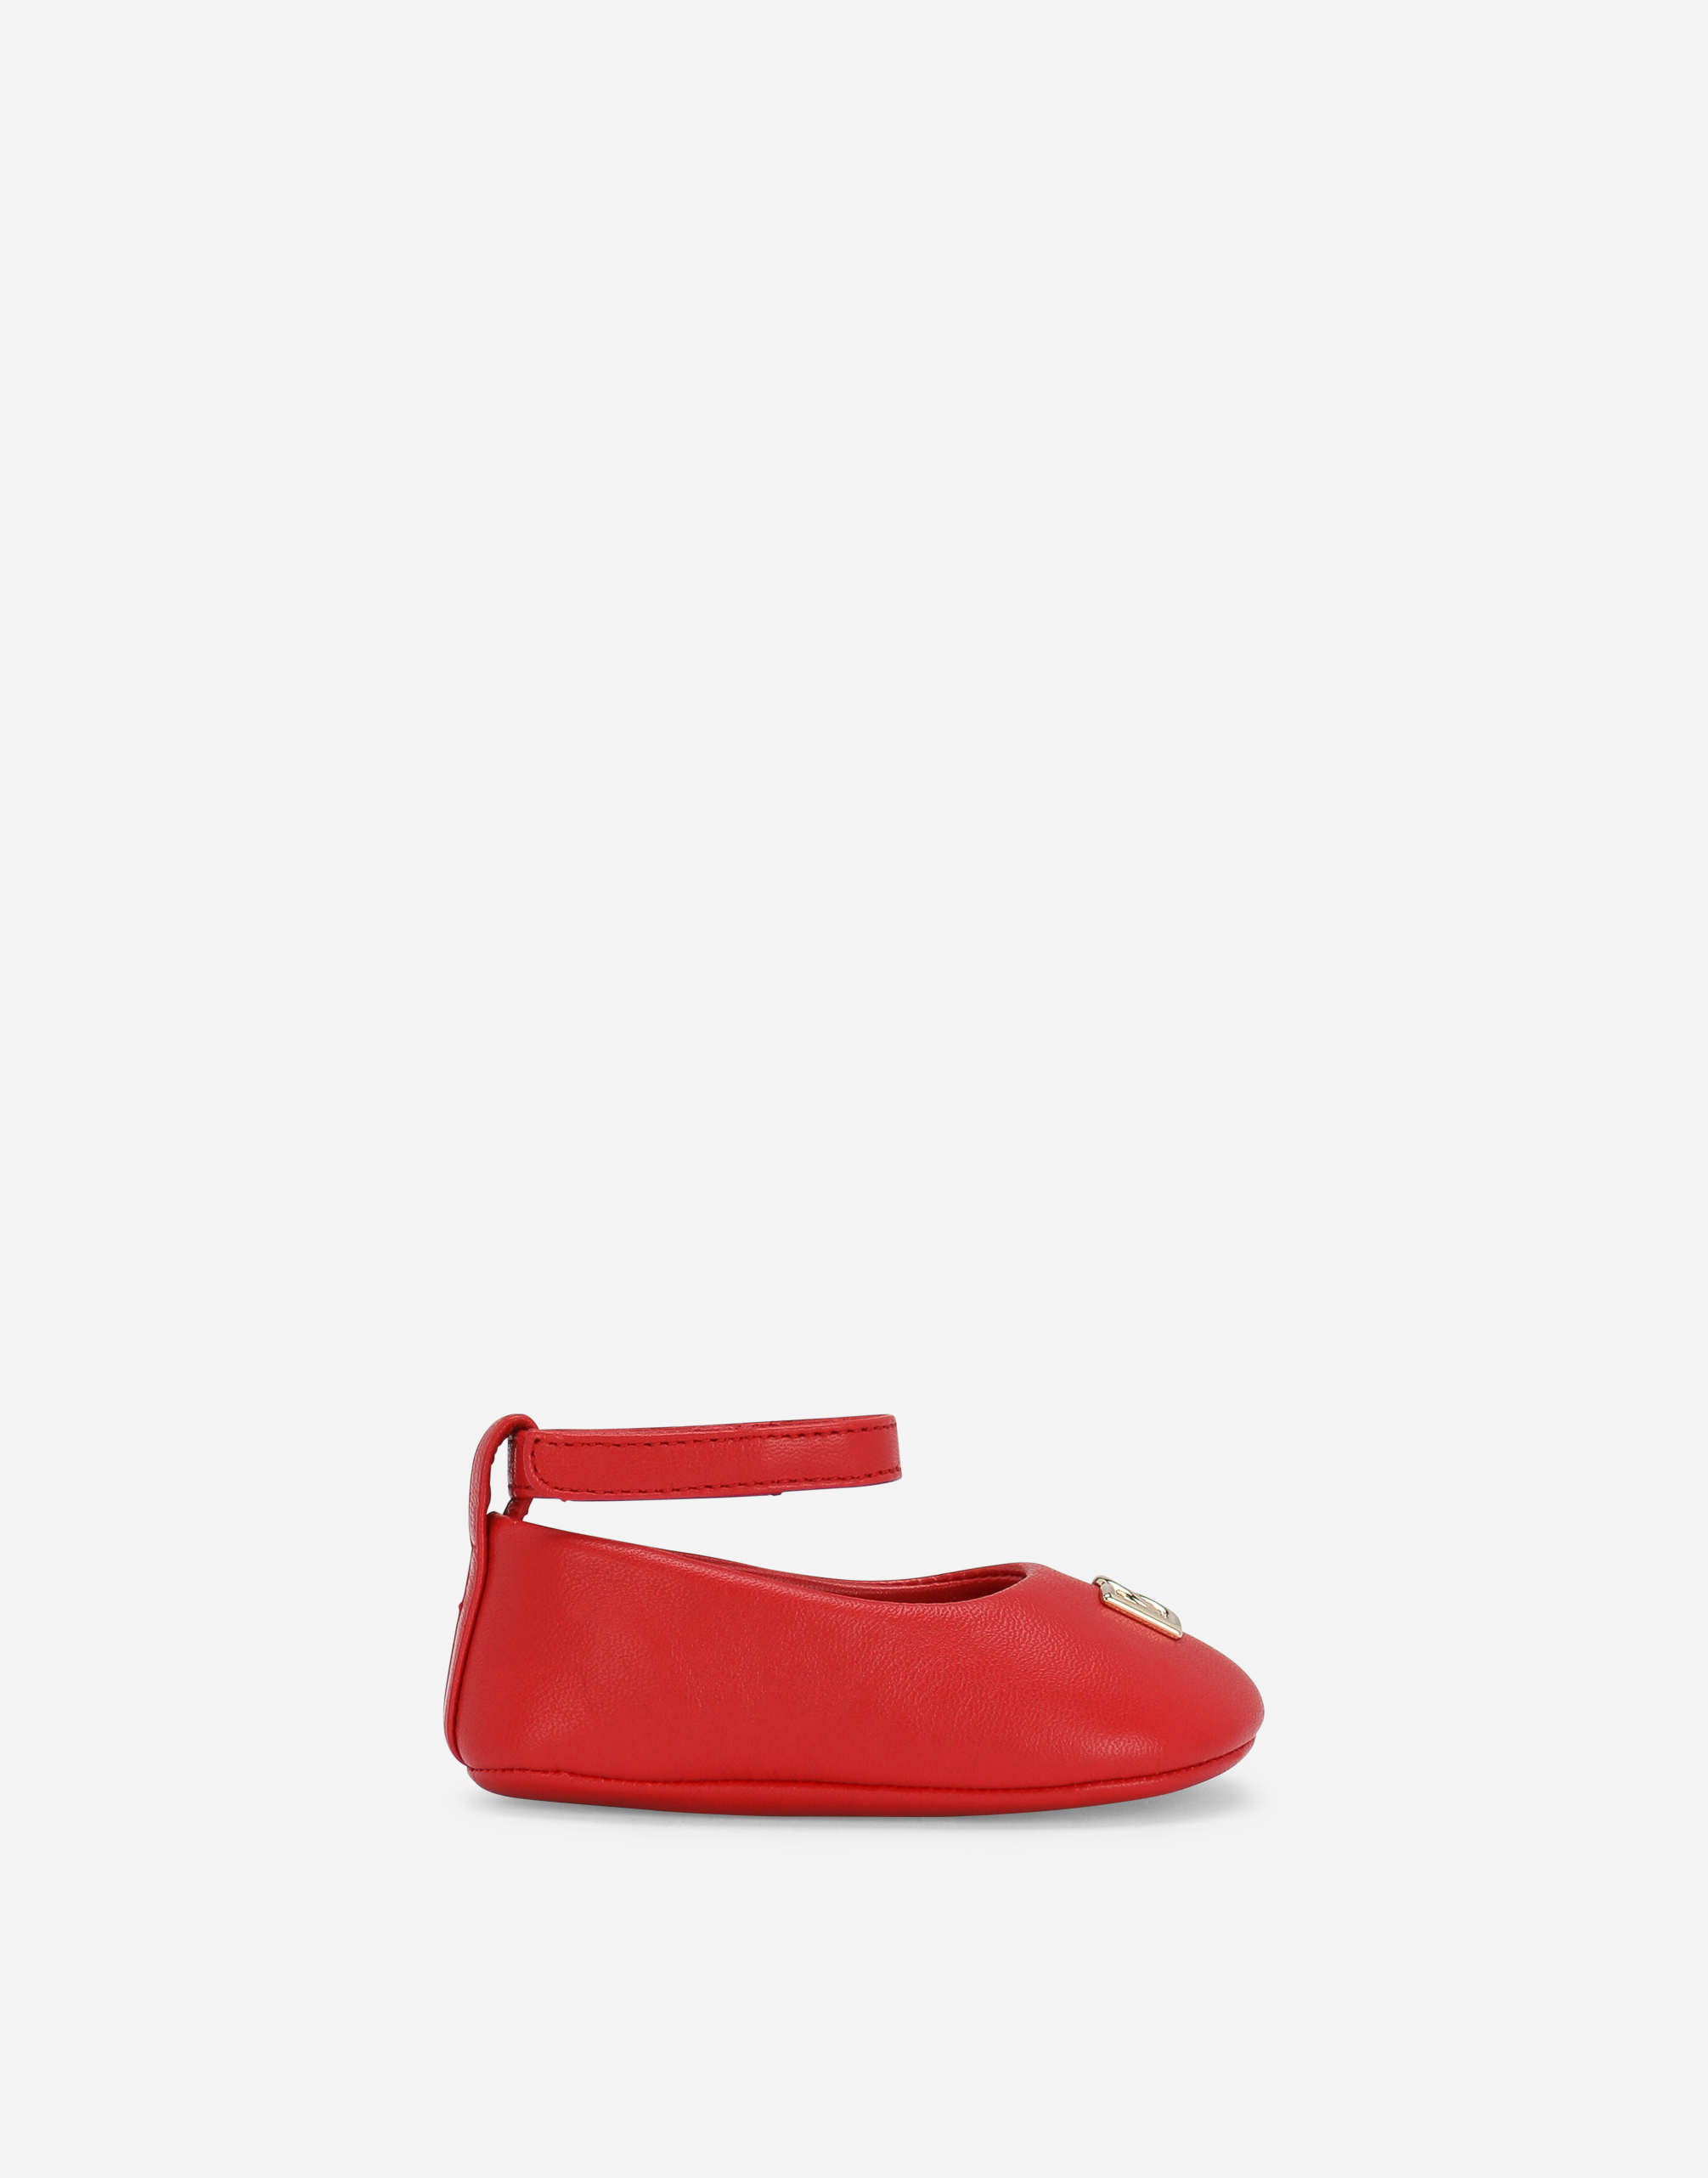 Nappa leather newborn ballet flats in Red